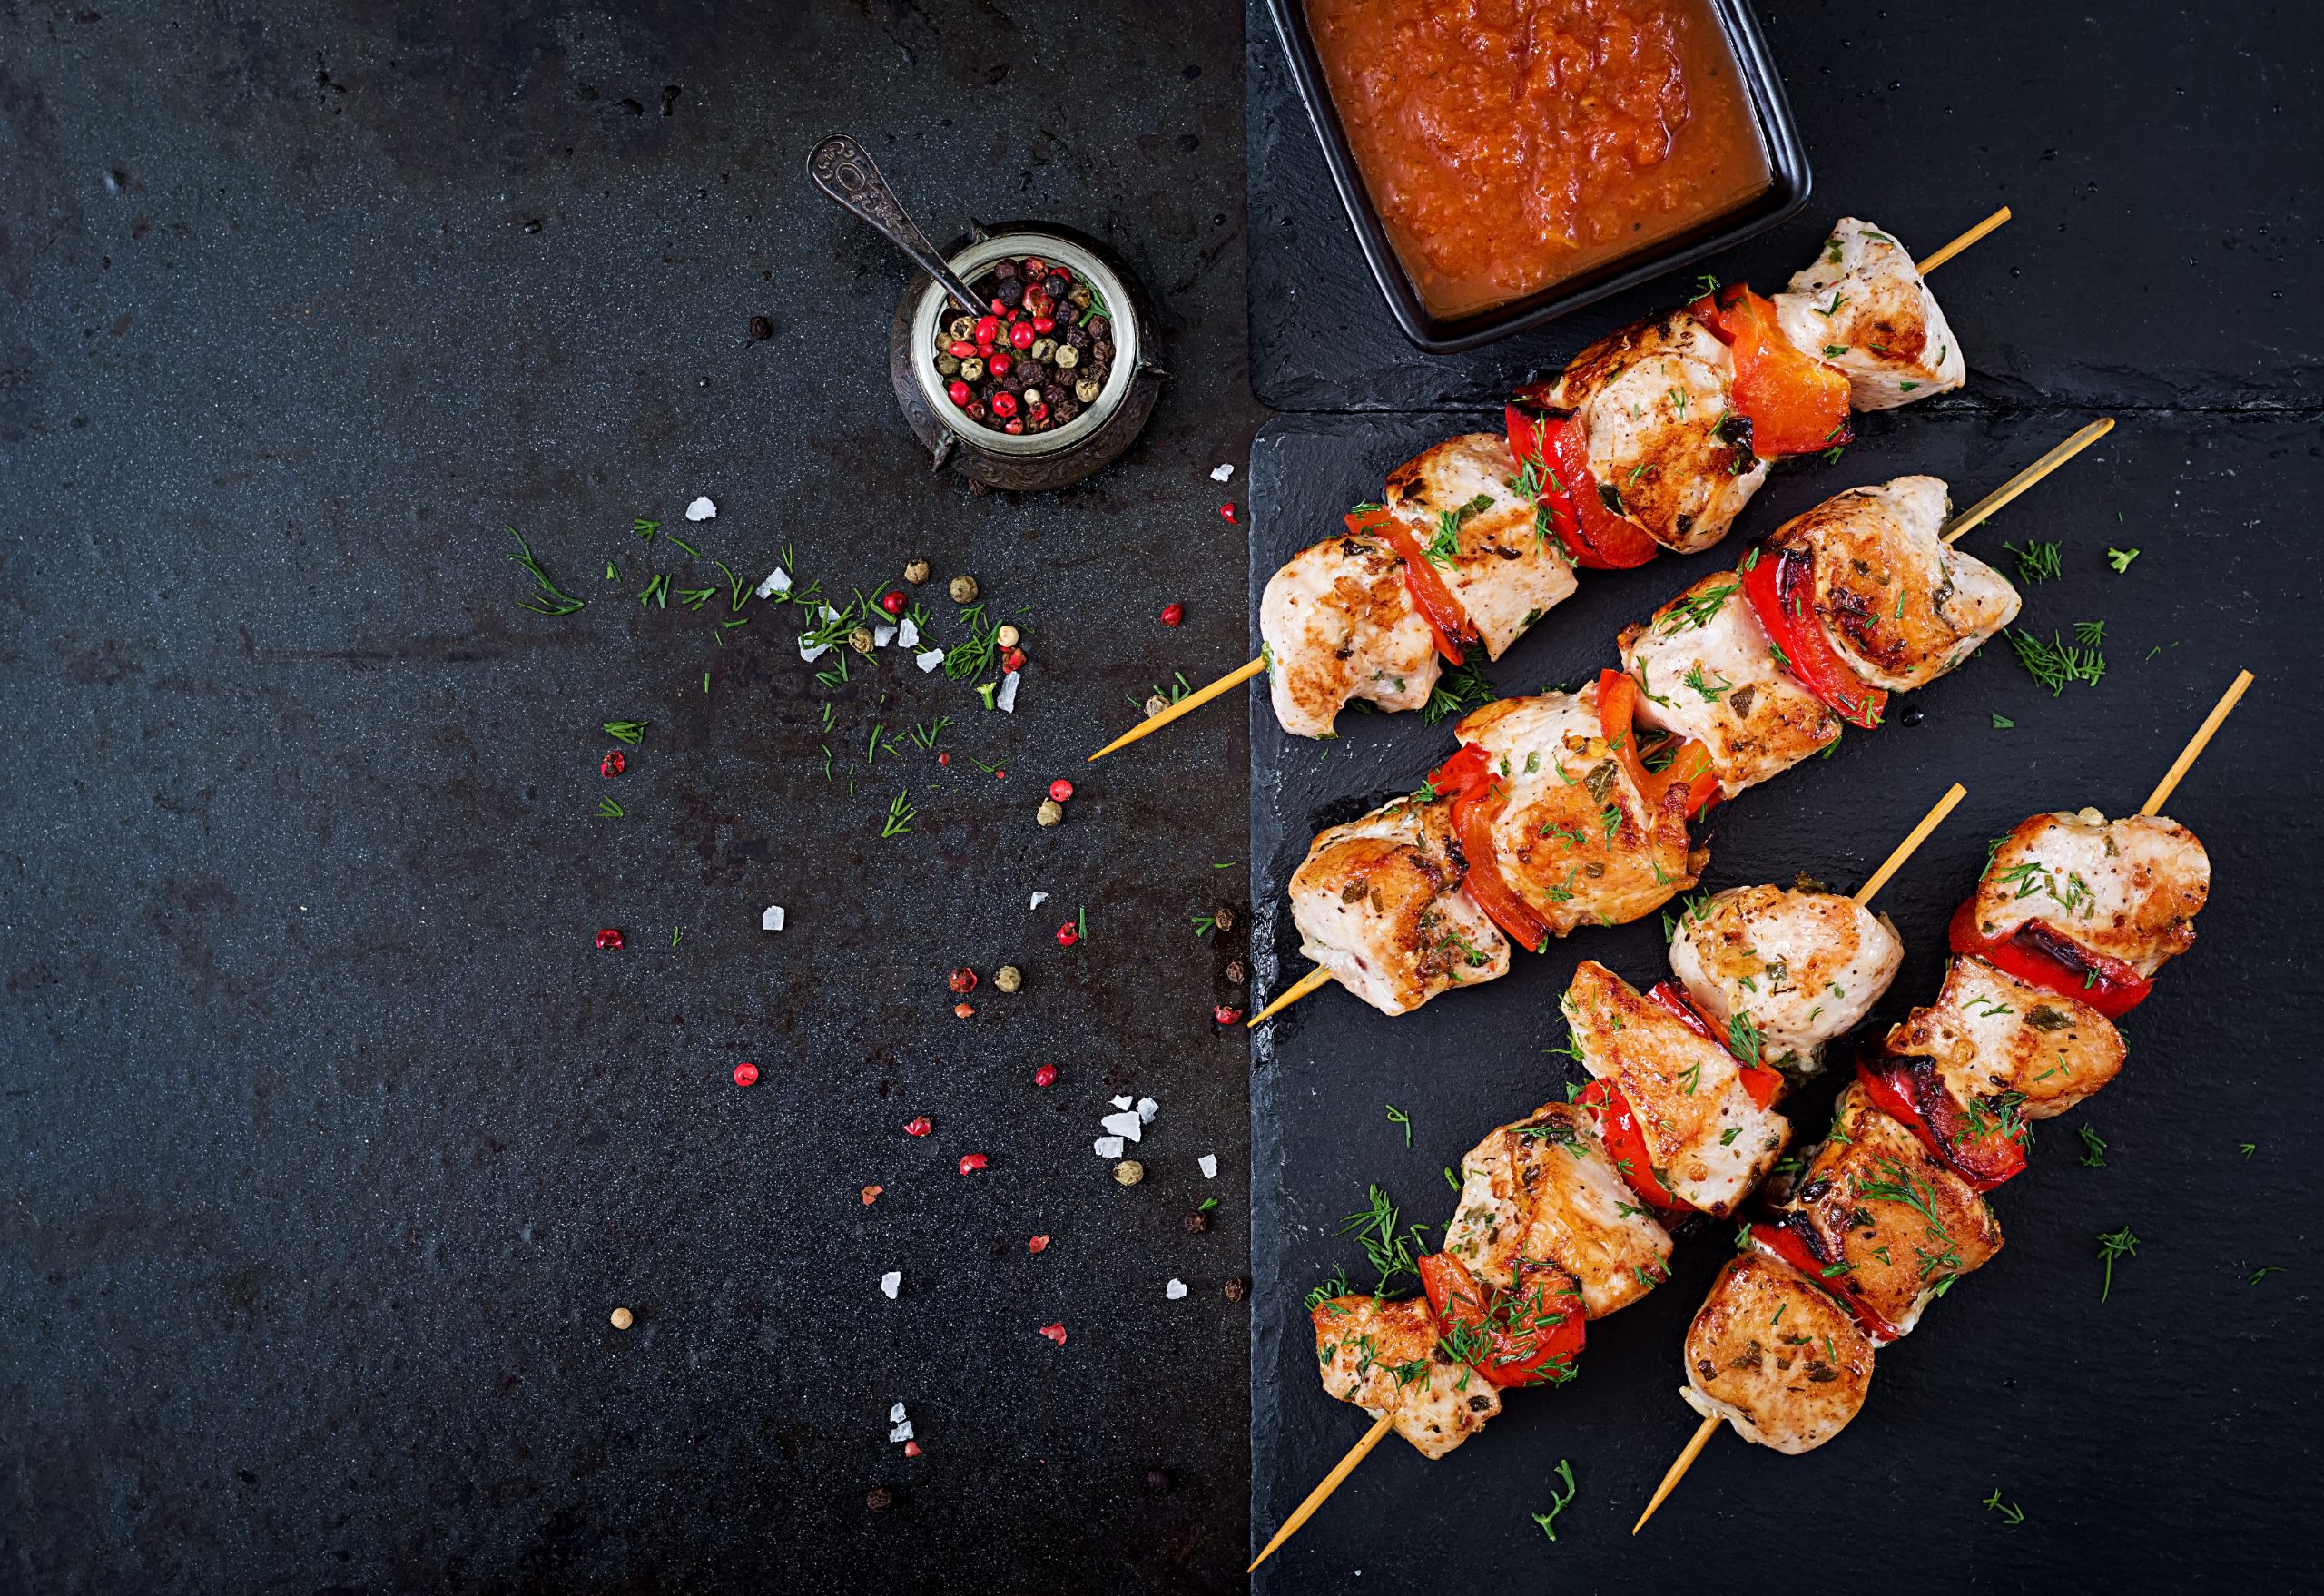 chicken-skewers-with-slices-sweet-peppers-dill-tasty-food-weekend-meal-top-view-flat-lay-scaled-1.jpg